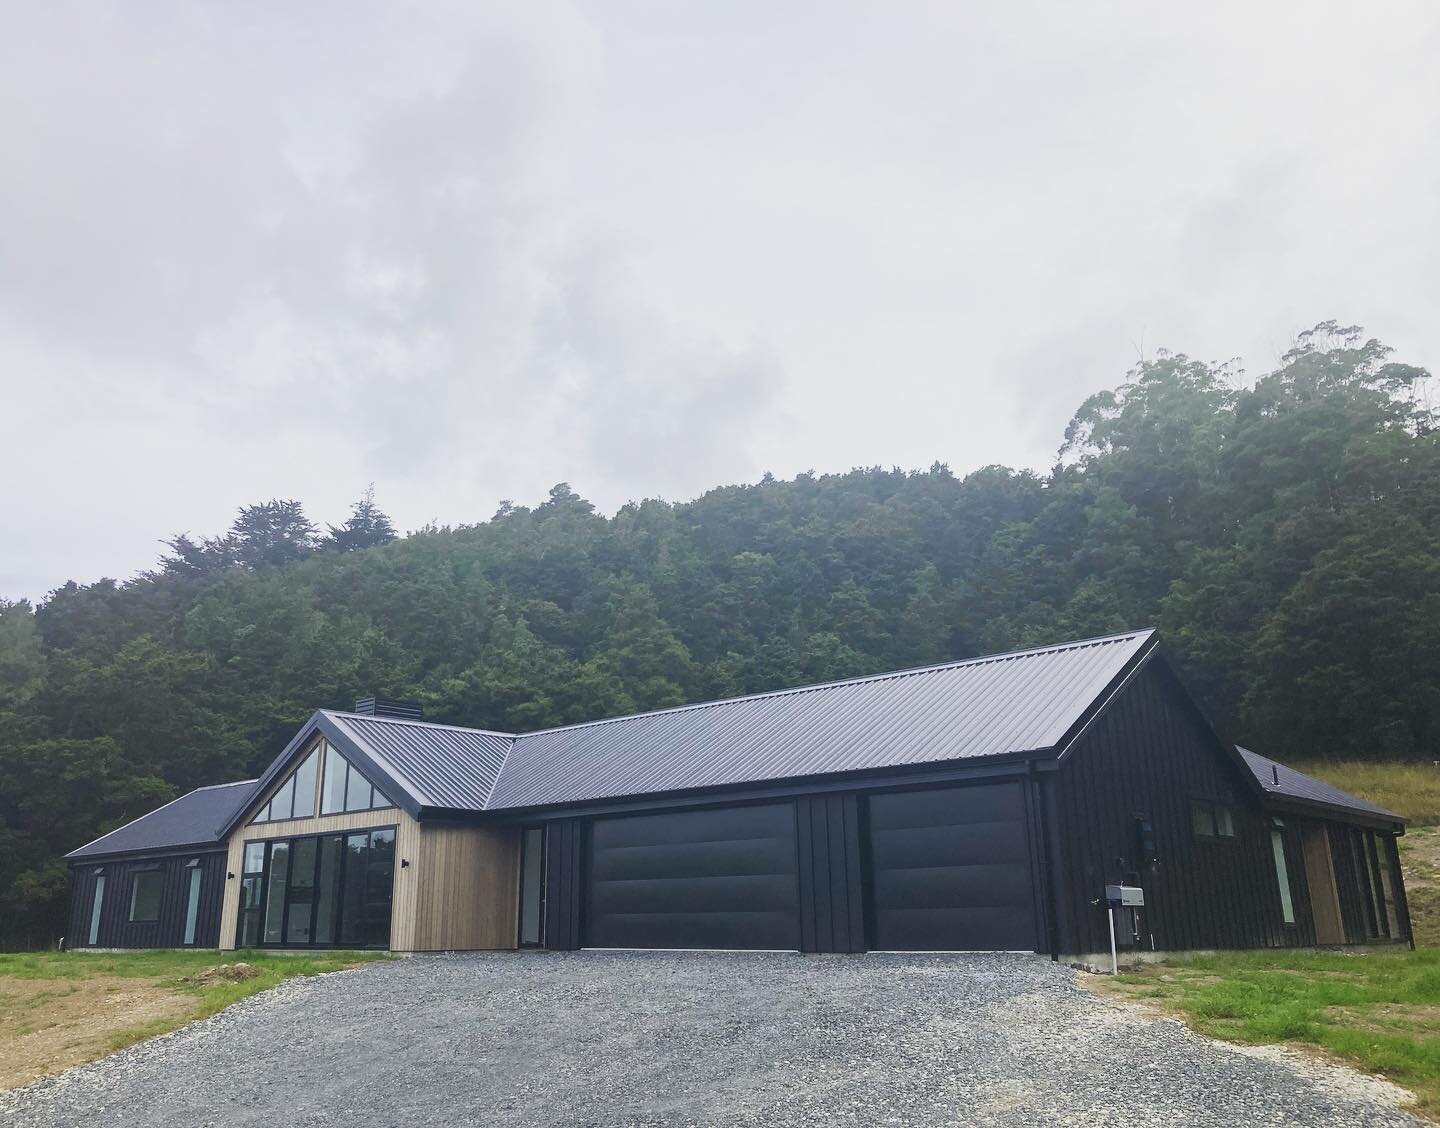 New build almost complete with the cedar clad gable looking great on a dramatic cloudy morning 

#kaiserconstructionbuilding #buildersofinsta #cedarcladding #buildingyourfuture #homesnothouses #whangareibusiness #cloudymorning